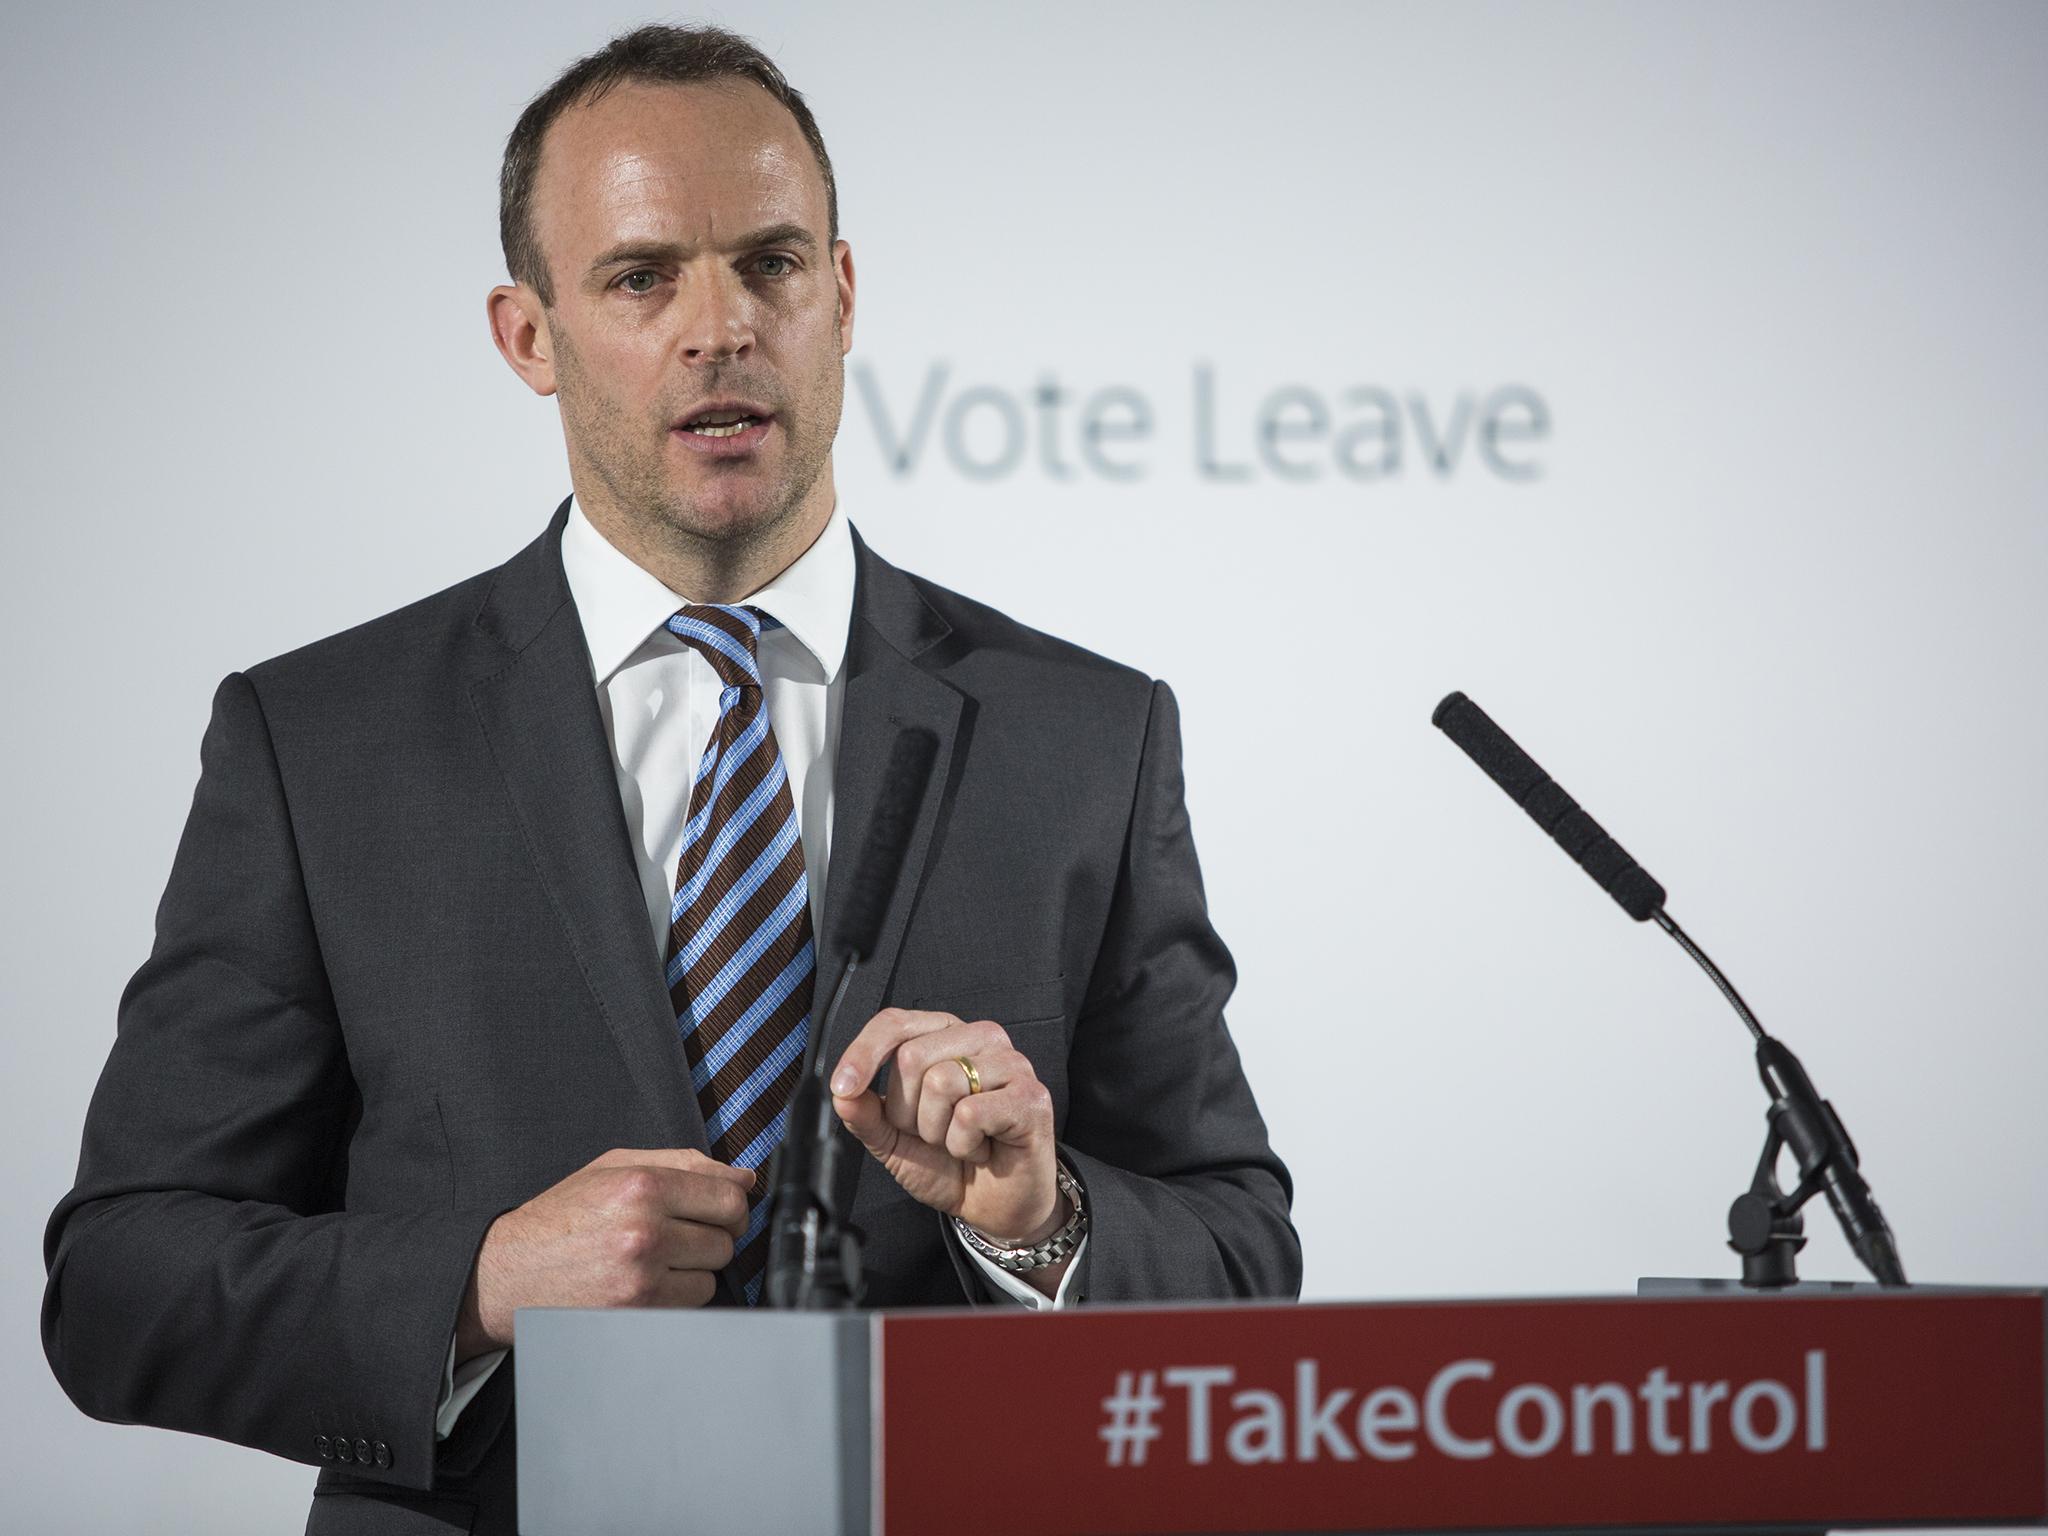 Dominic Raab during the EU referendum. He is consulting lawyers over claims made against him.